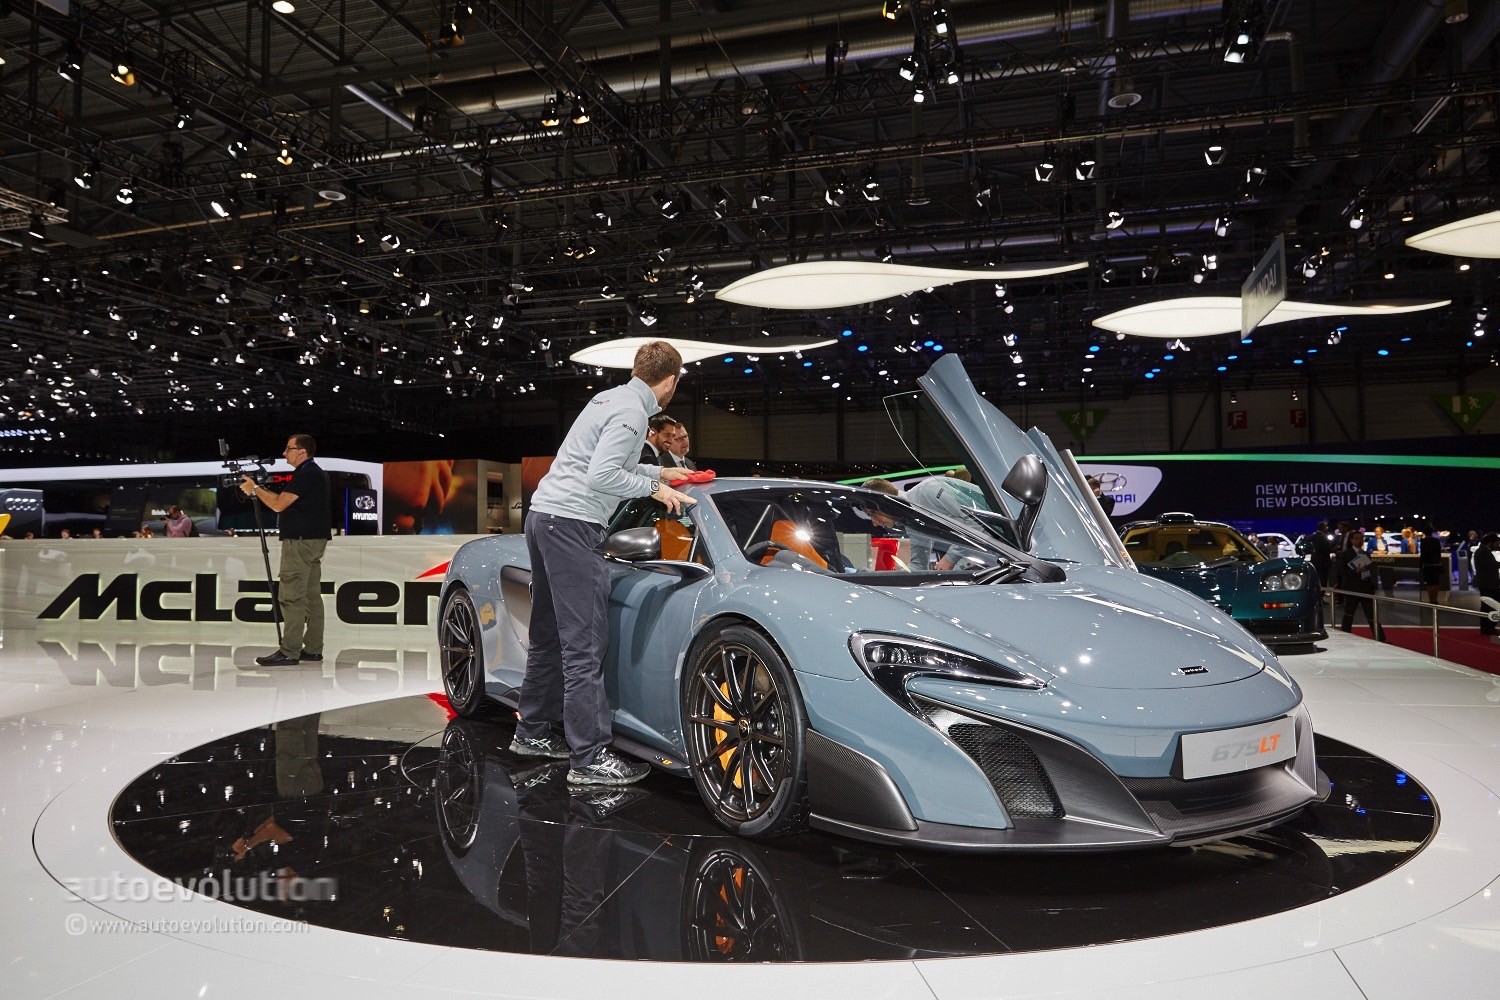 mclaren-675lt-is-a-longtail-supercar-for-the-track-in-geneva-video-live-photos_16